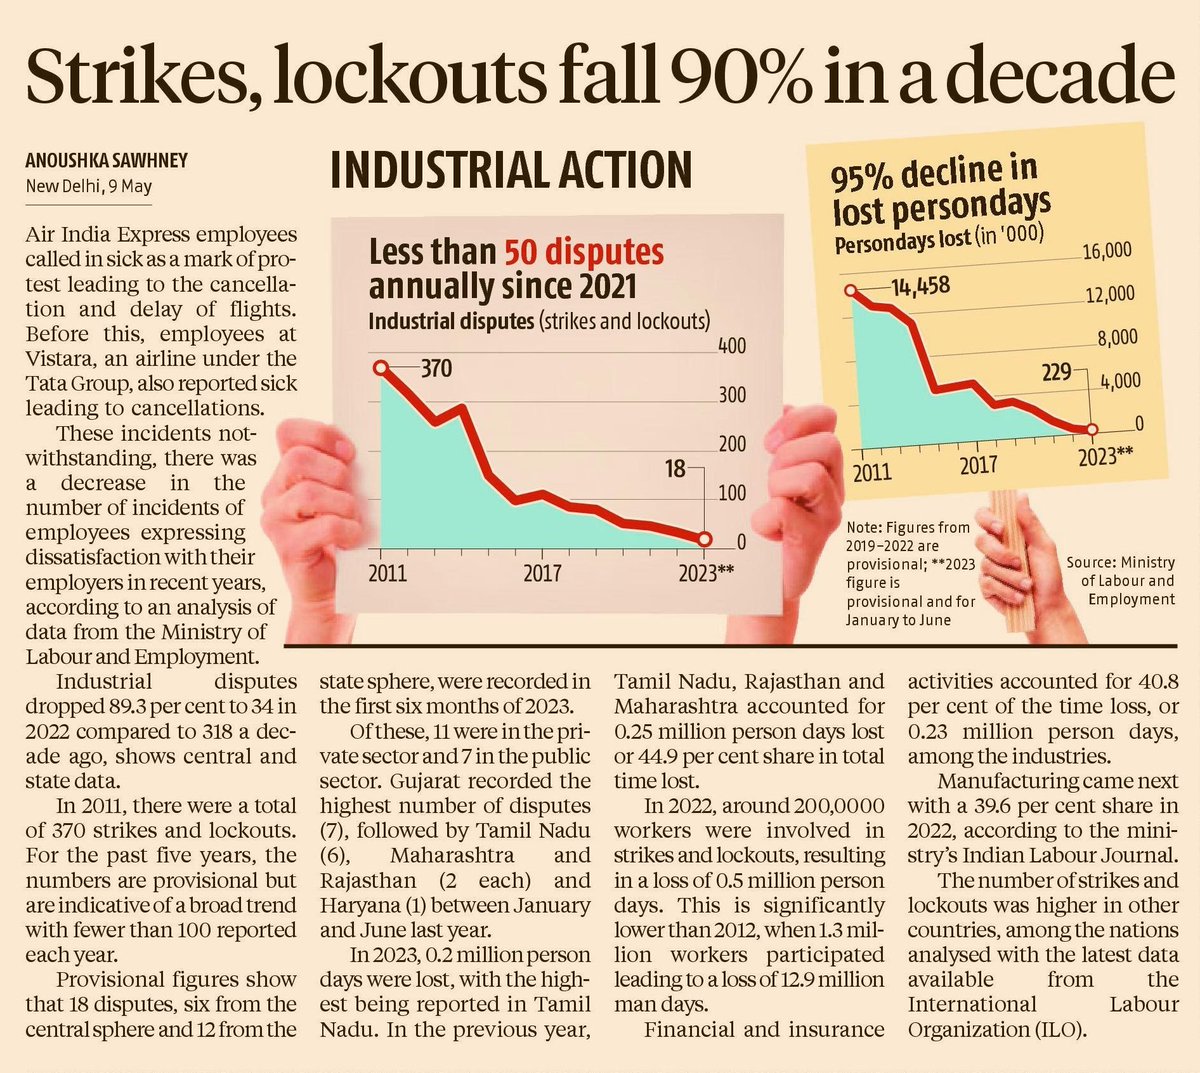 After a long time Industrial relations are on the mend. This is why the 'Jitni Abaadi Utna Haq' type narrative is so dangerous. It will take us back to the stone age.